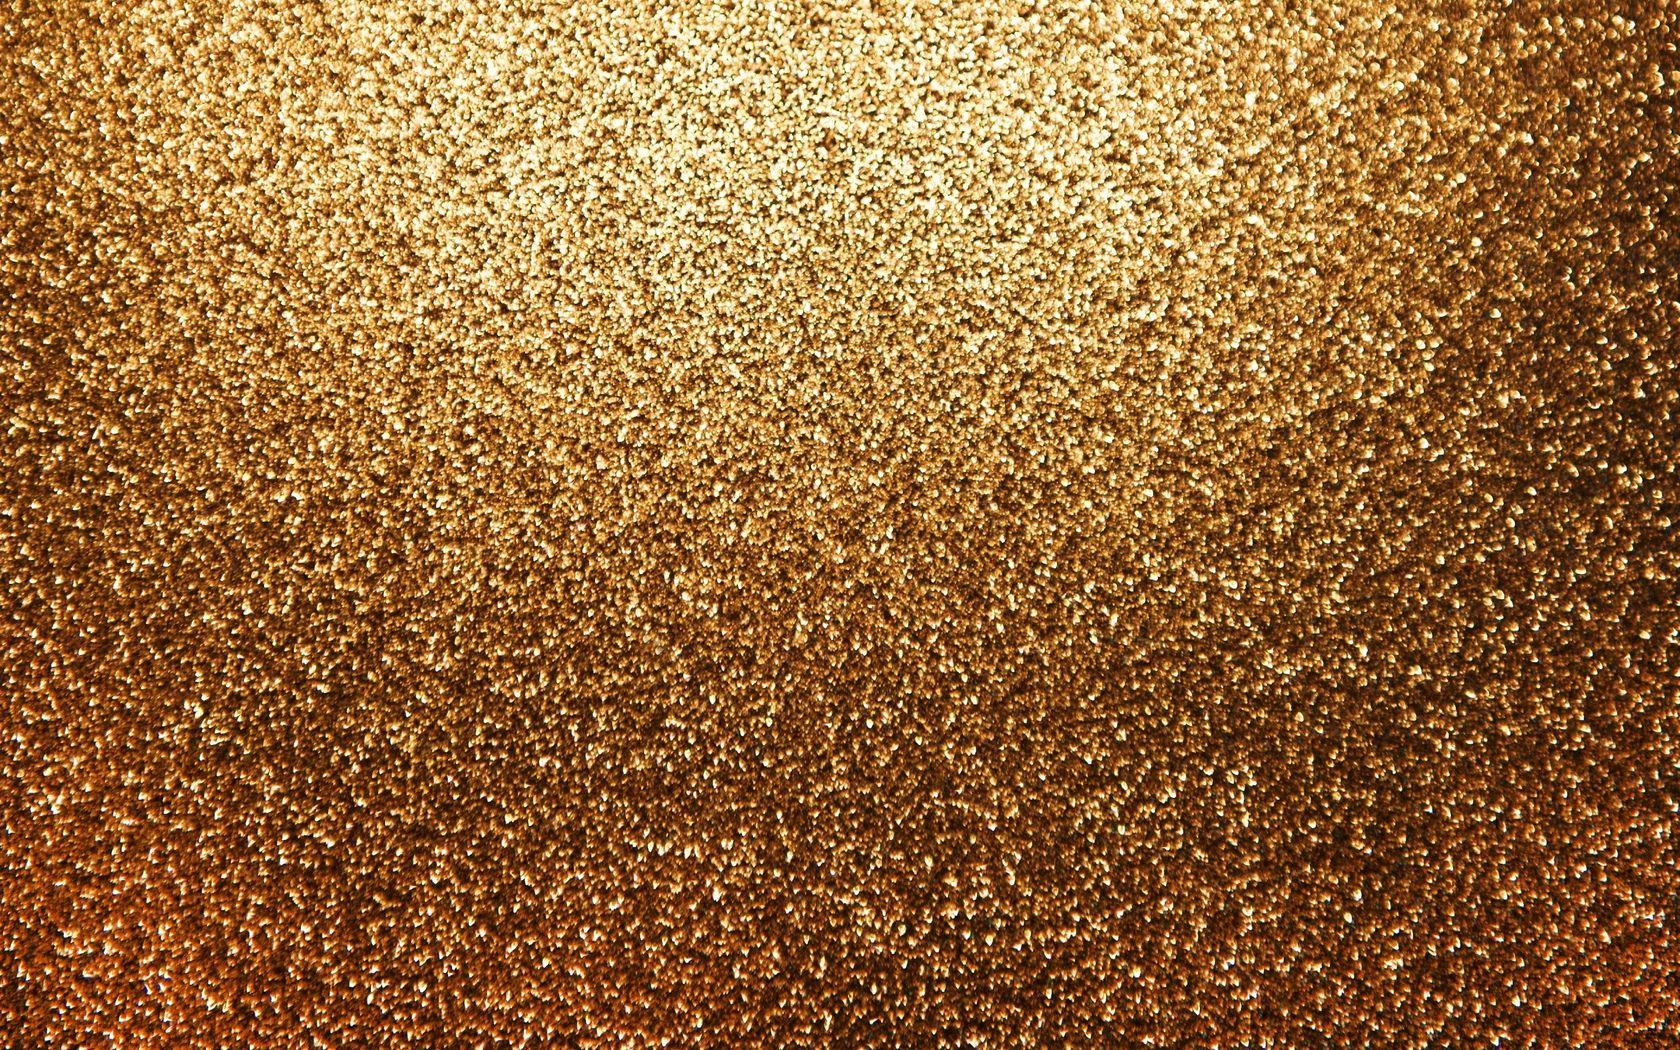 Download wallpapers gold dust, gold, texture, sand, shine, golden